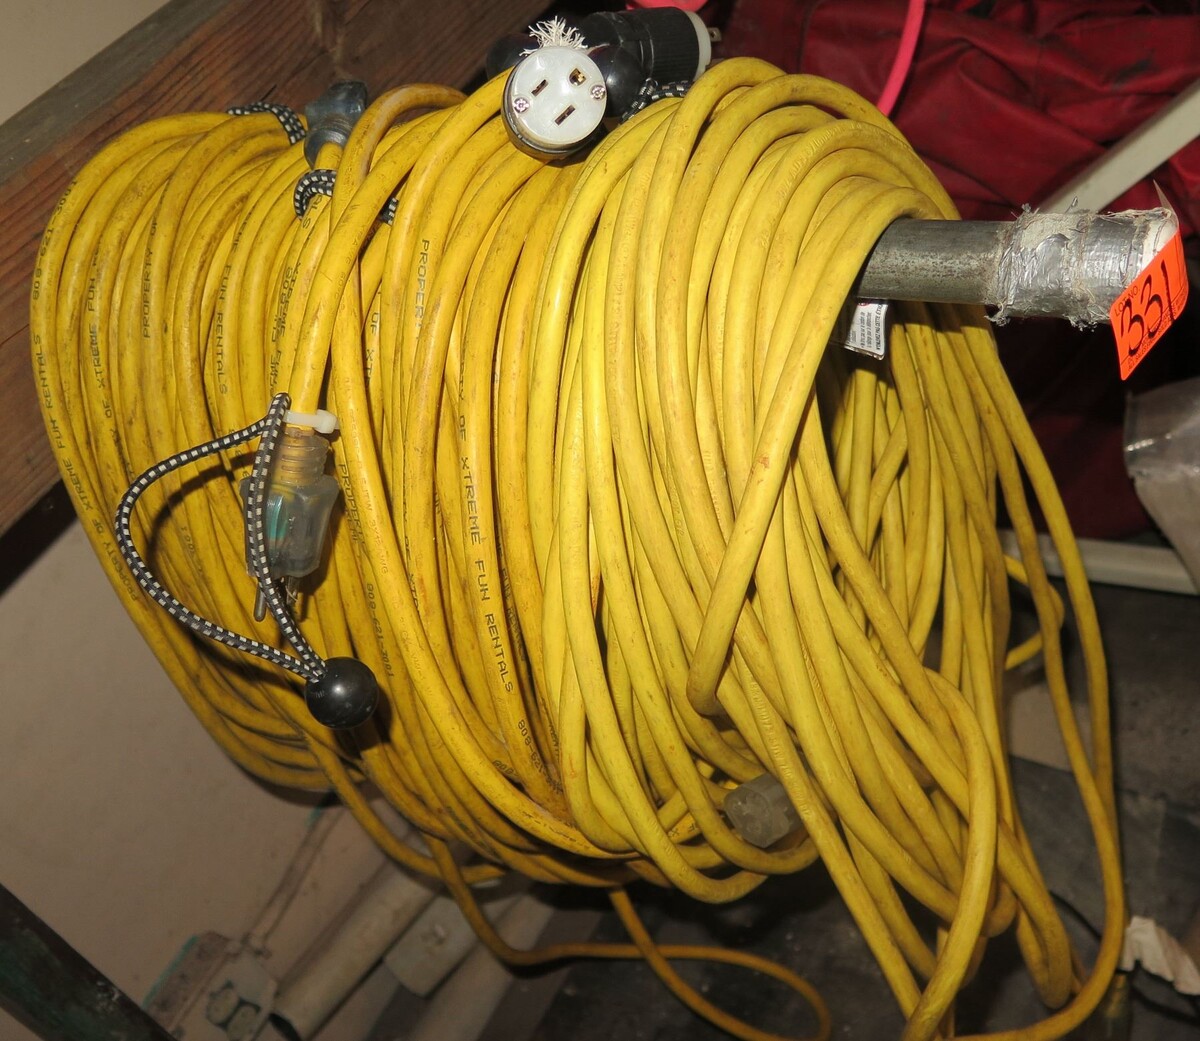 What Is The Longest Extension Cord Available